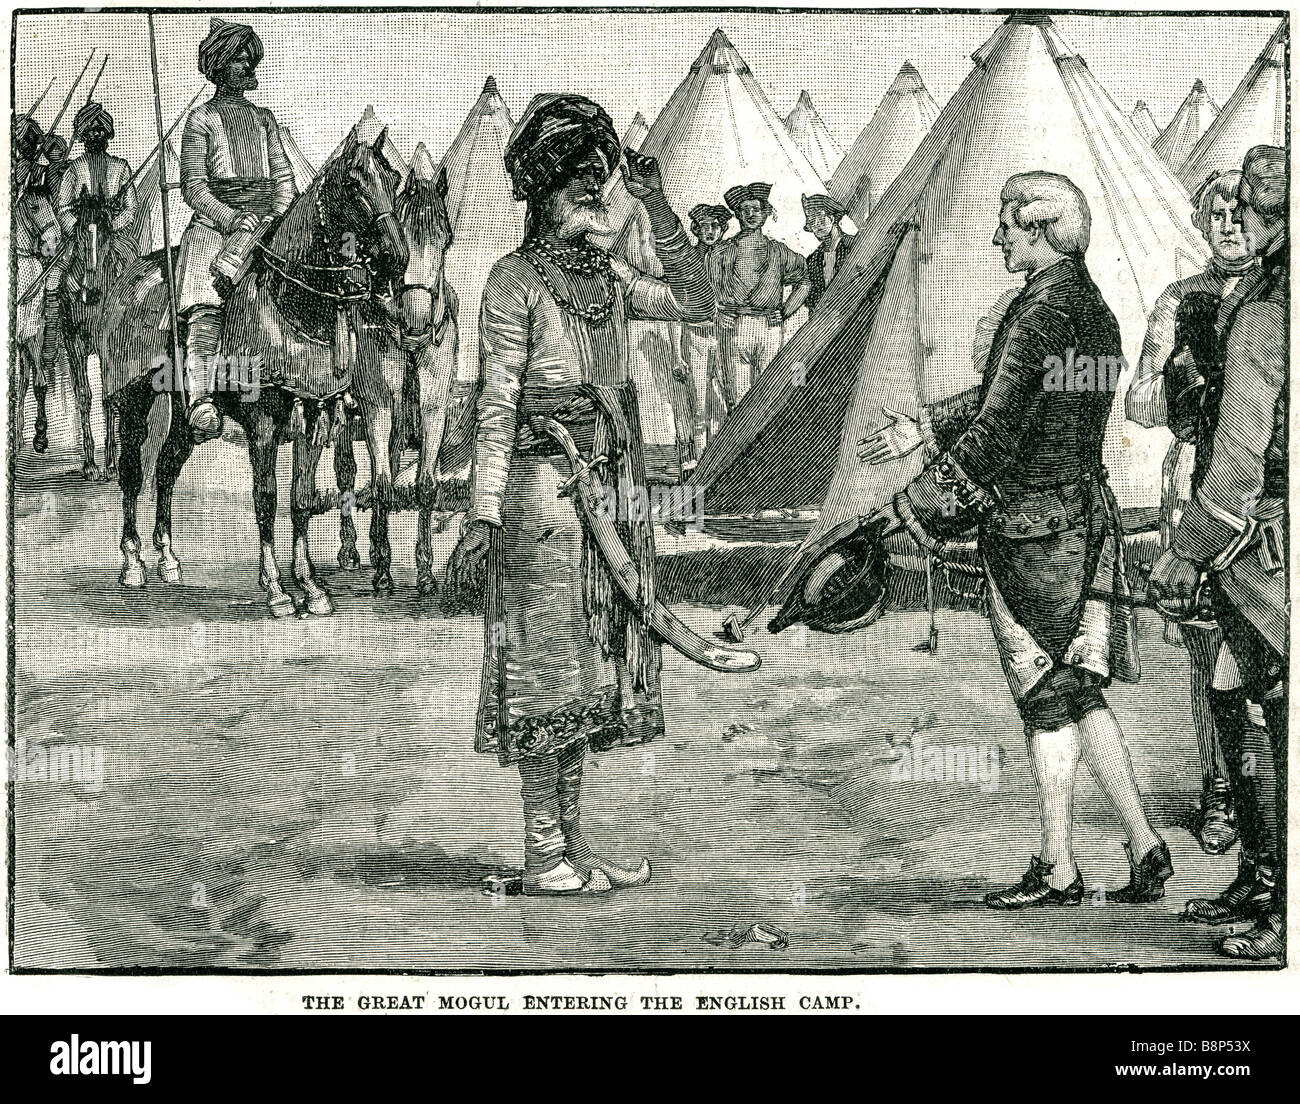 great mogul entering english camp Mughal Empire Muslim imperial power Stock Photo